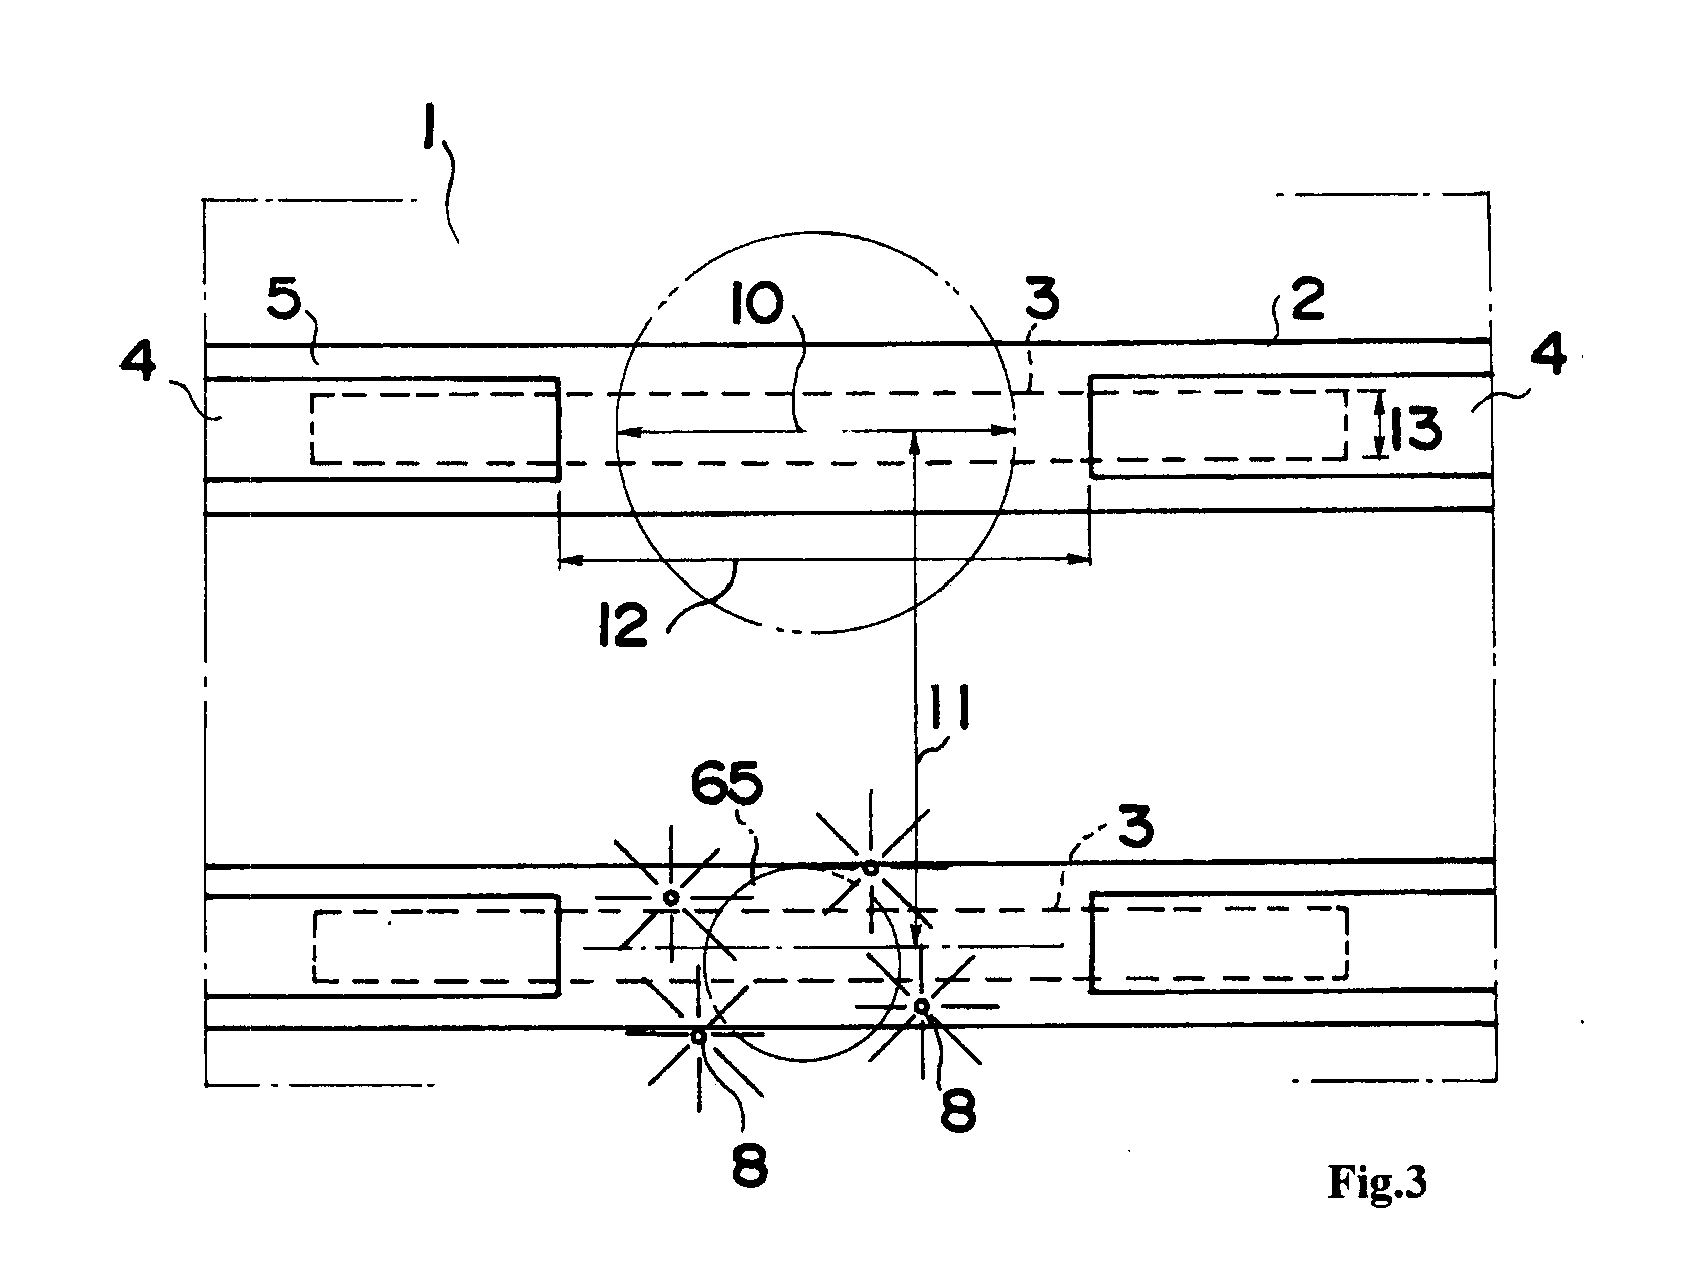 Method and apparatus for modifying integrated circuit by laser